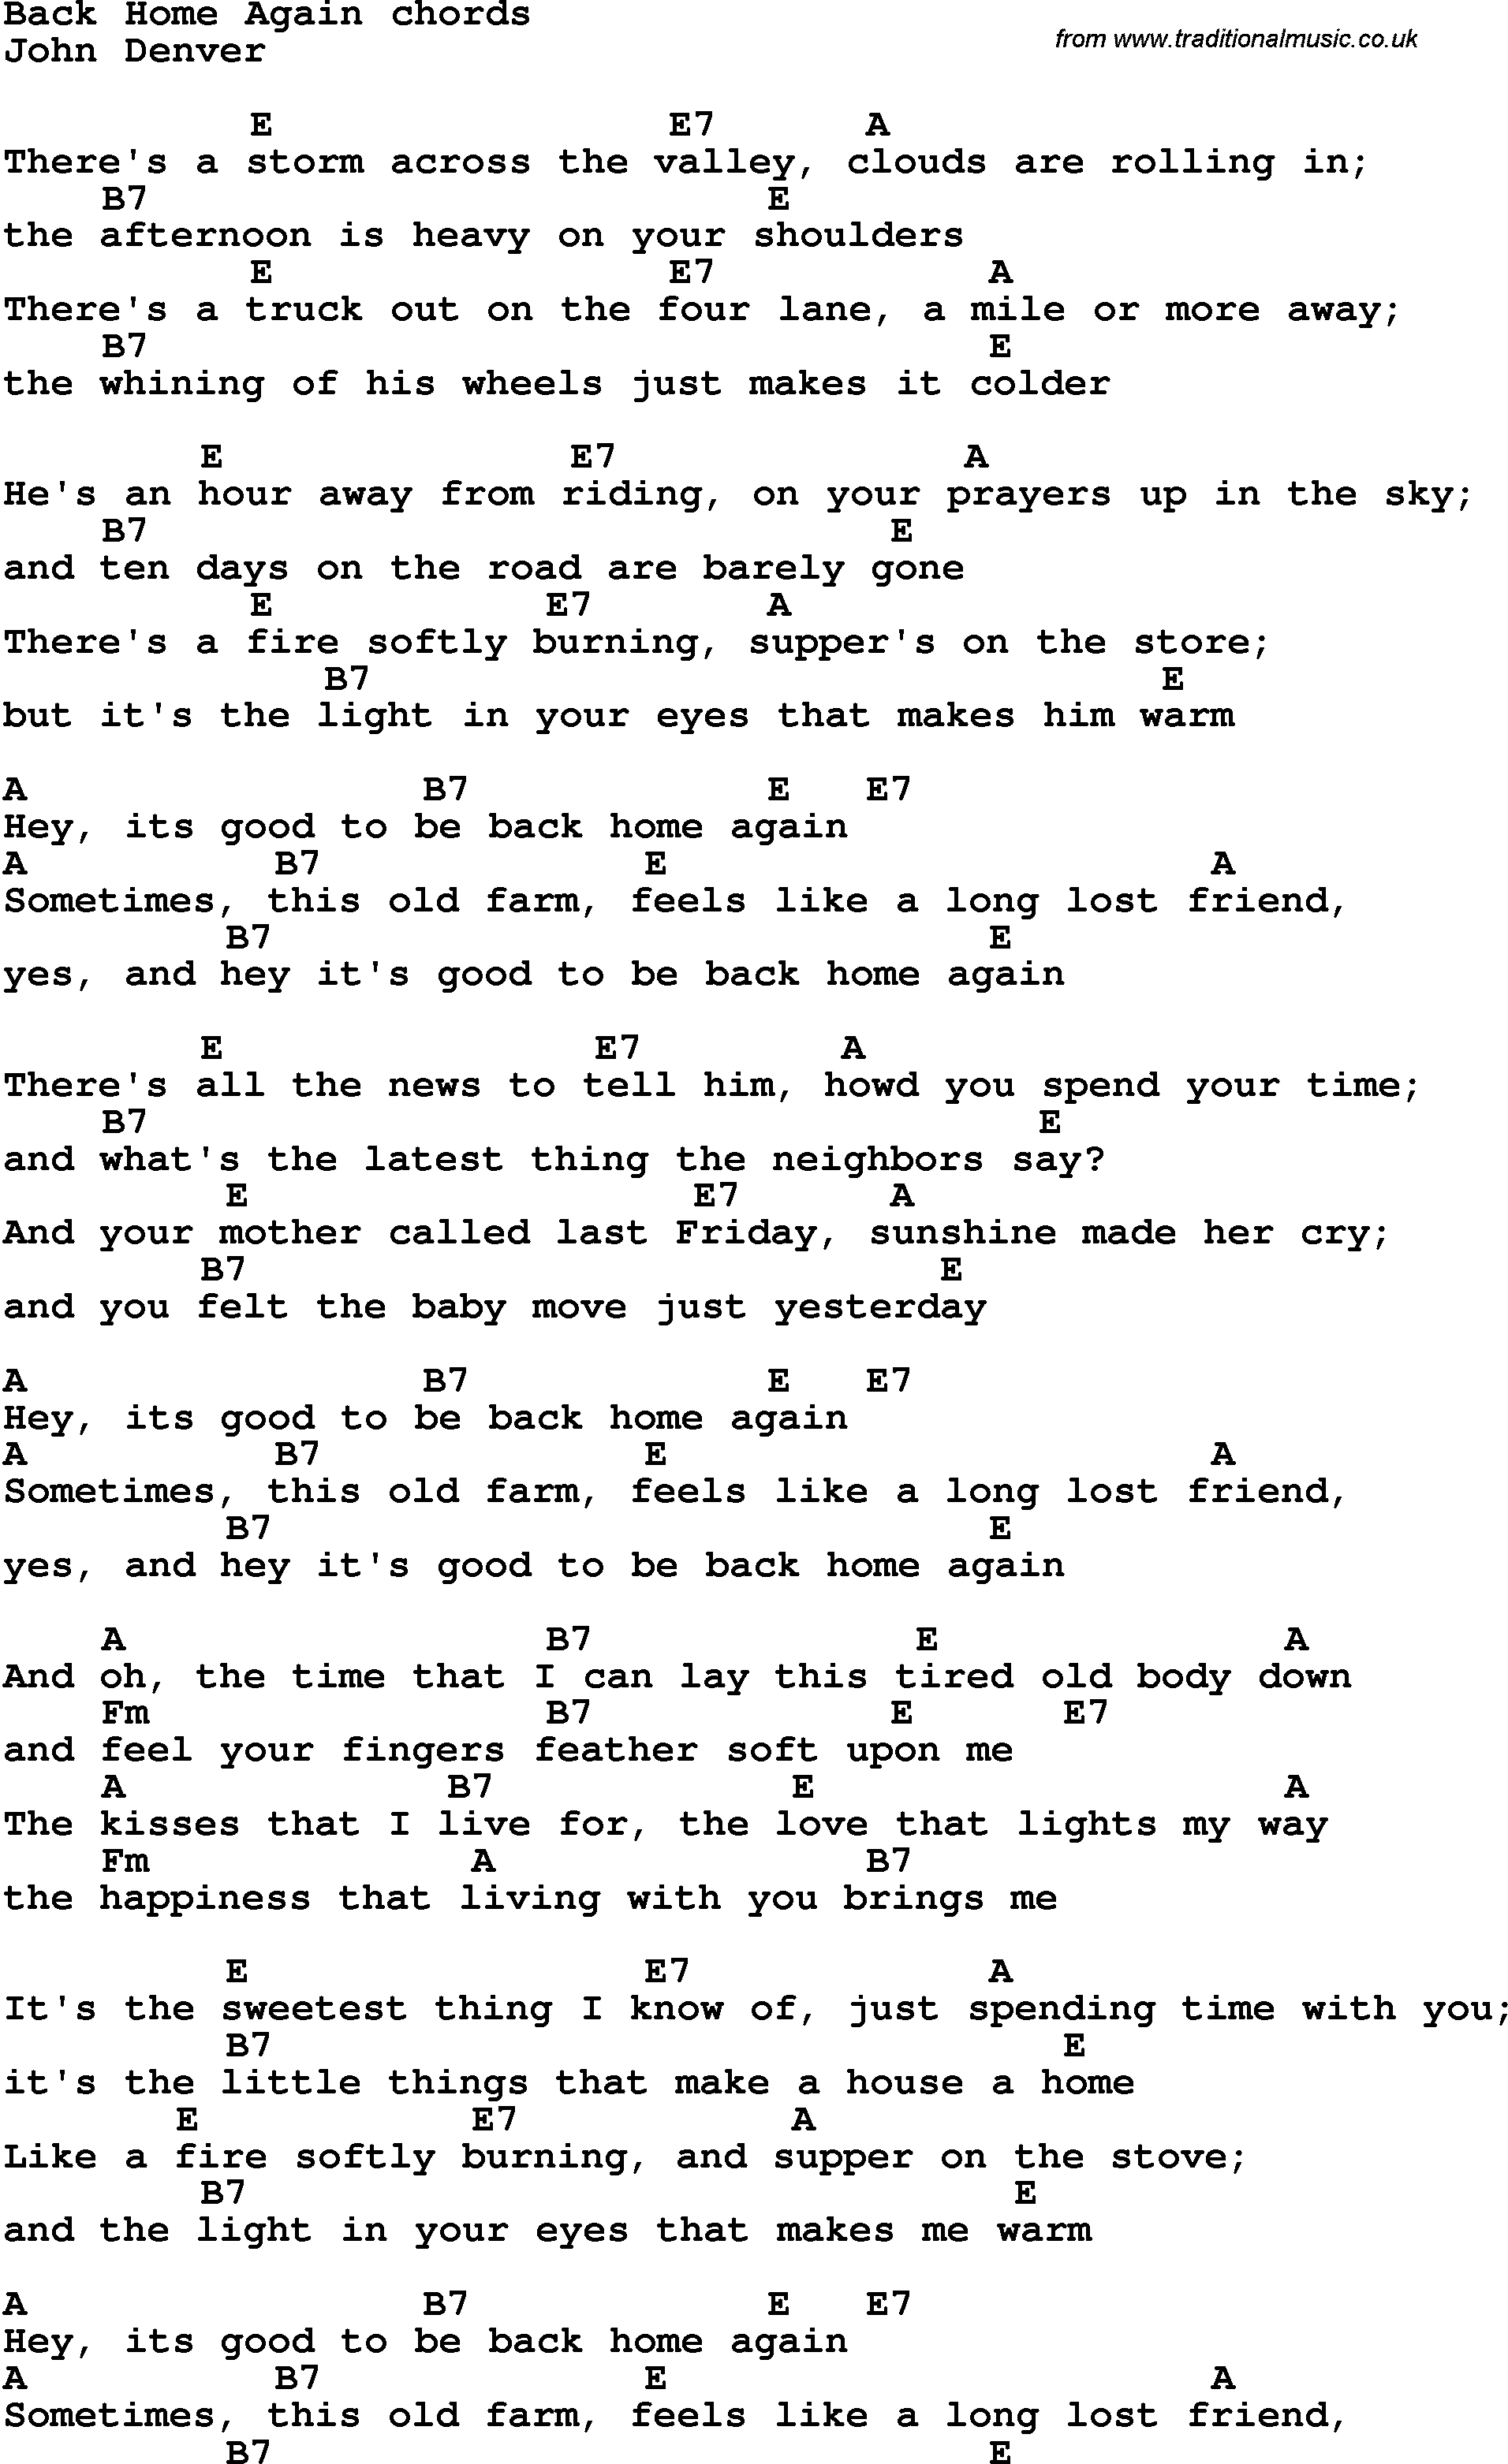 Song Lyrics with guitar chords for Back Home Again